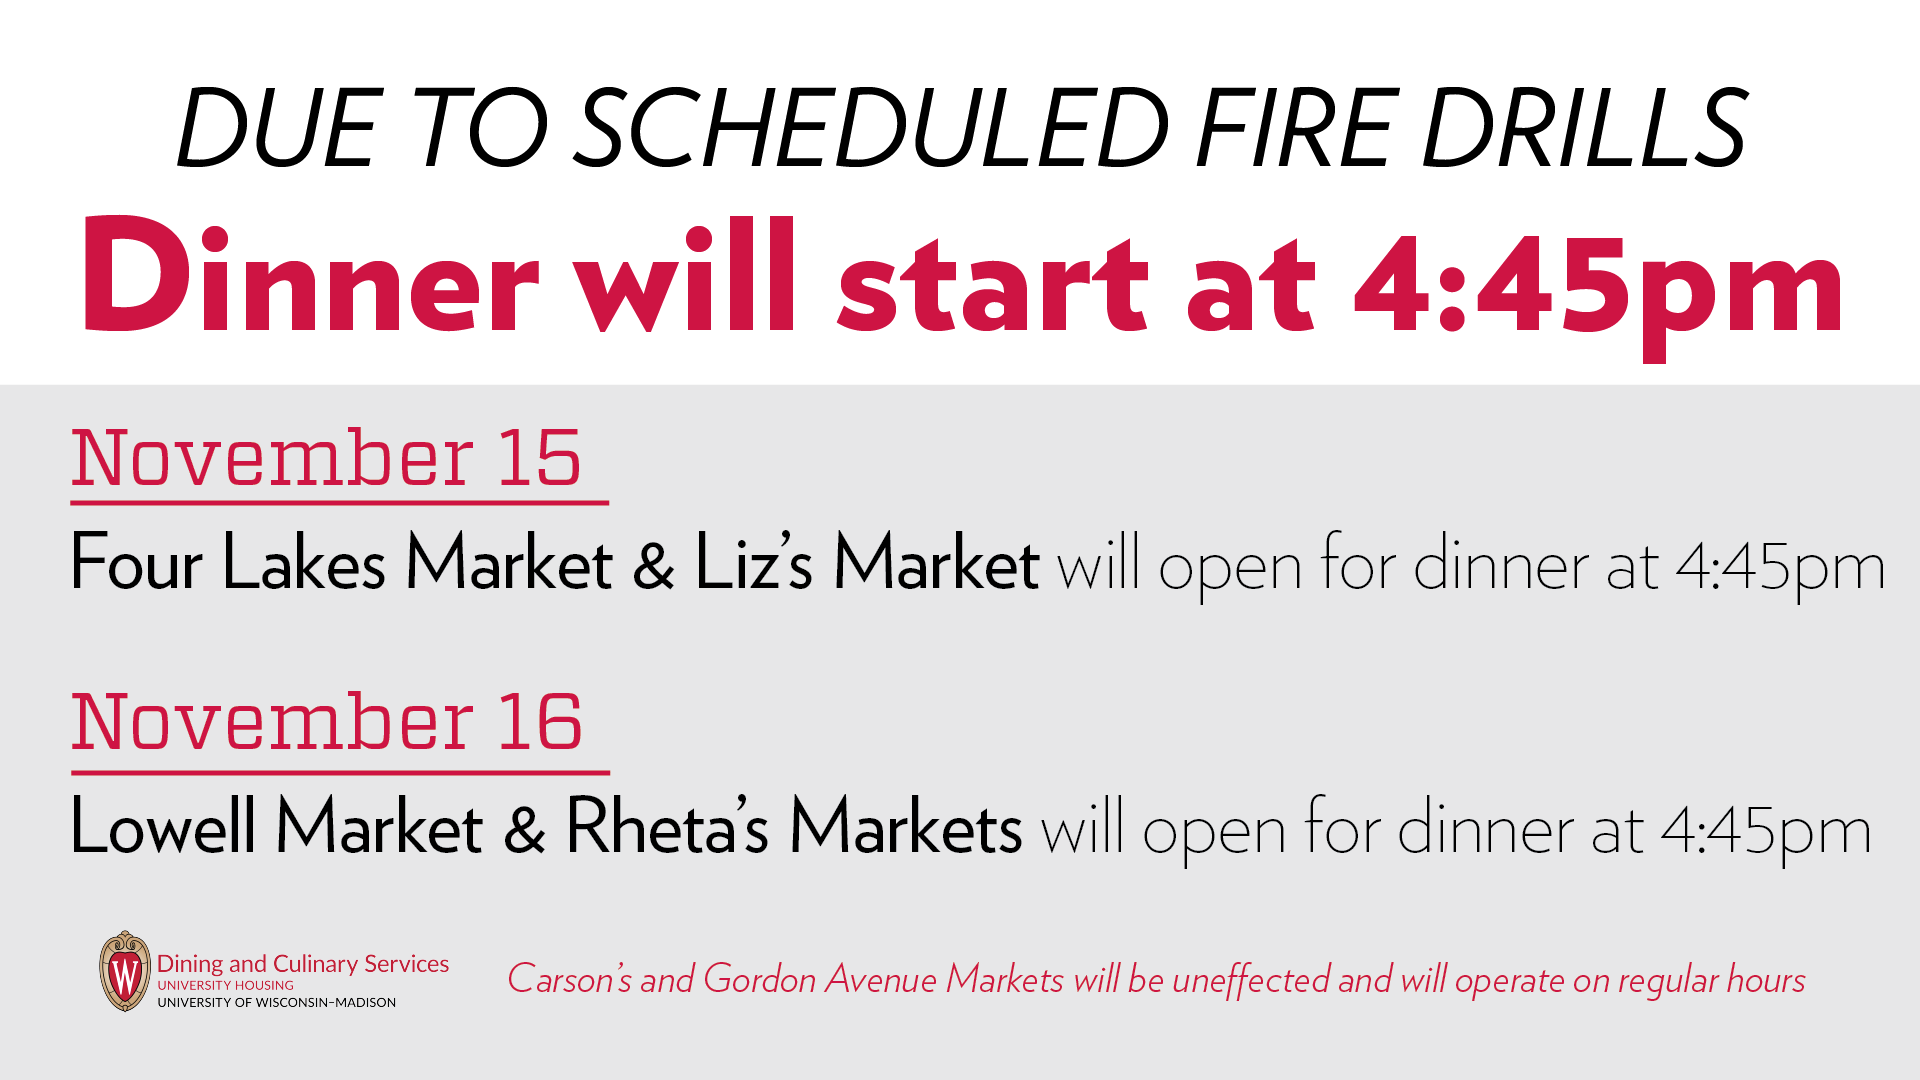 Due to scheduled fire drills, dinner will start at 4:45pm on November 15 at Four Lakes and Liz's Markets and on November 16 at Lowell and Rheta's Markets.